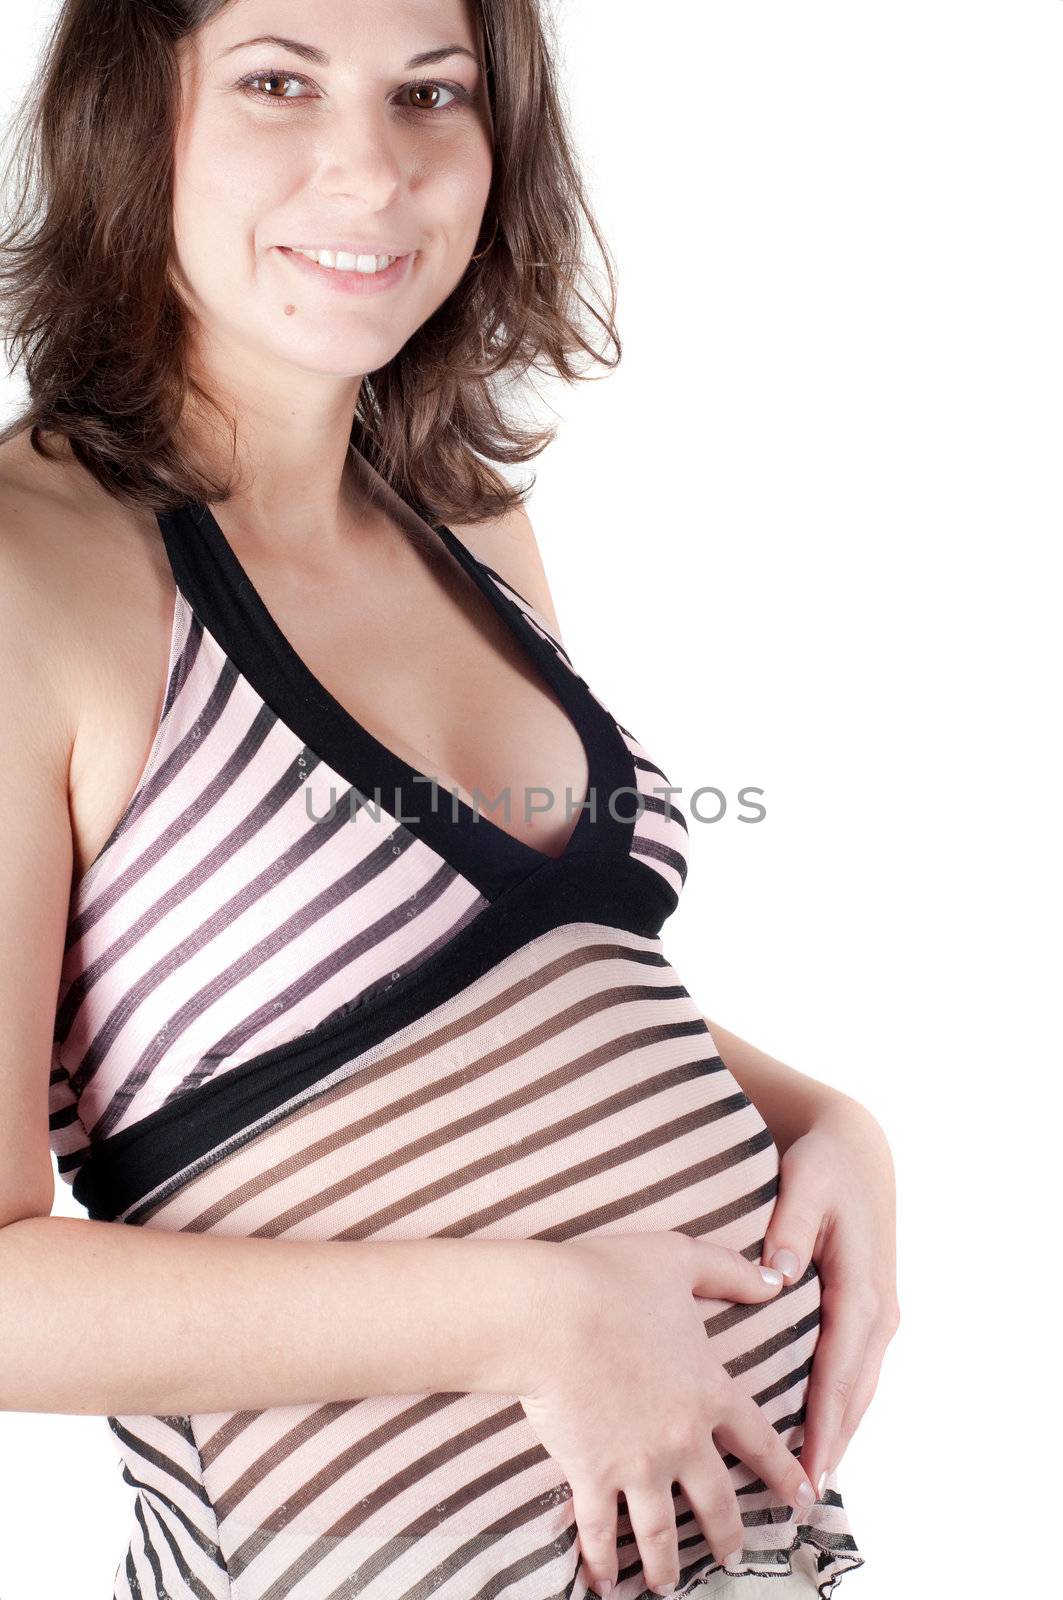 Pregnant woman hands in form of heart sign by anytka